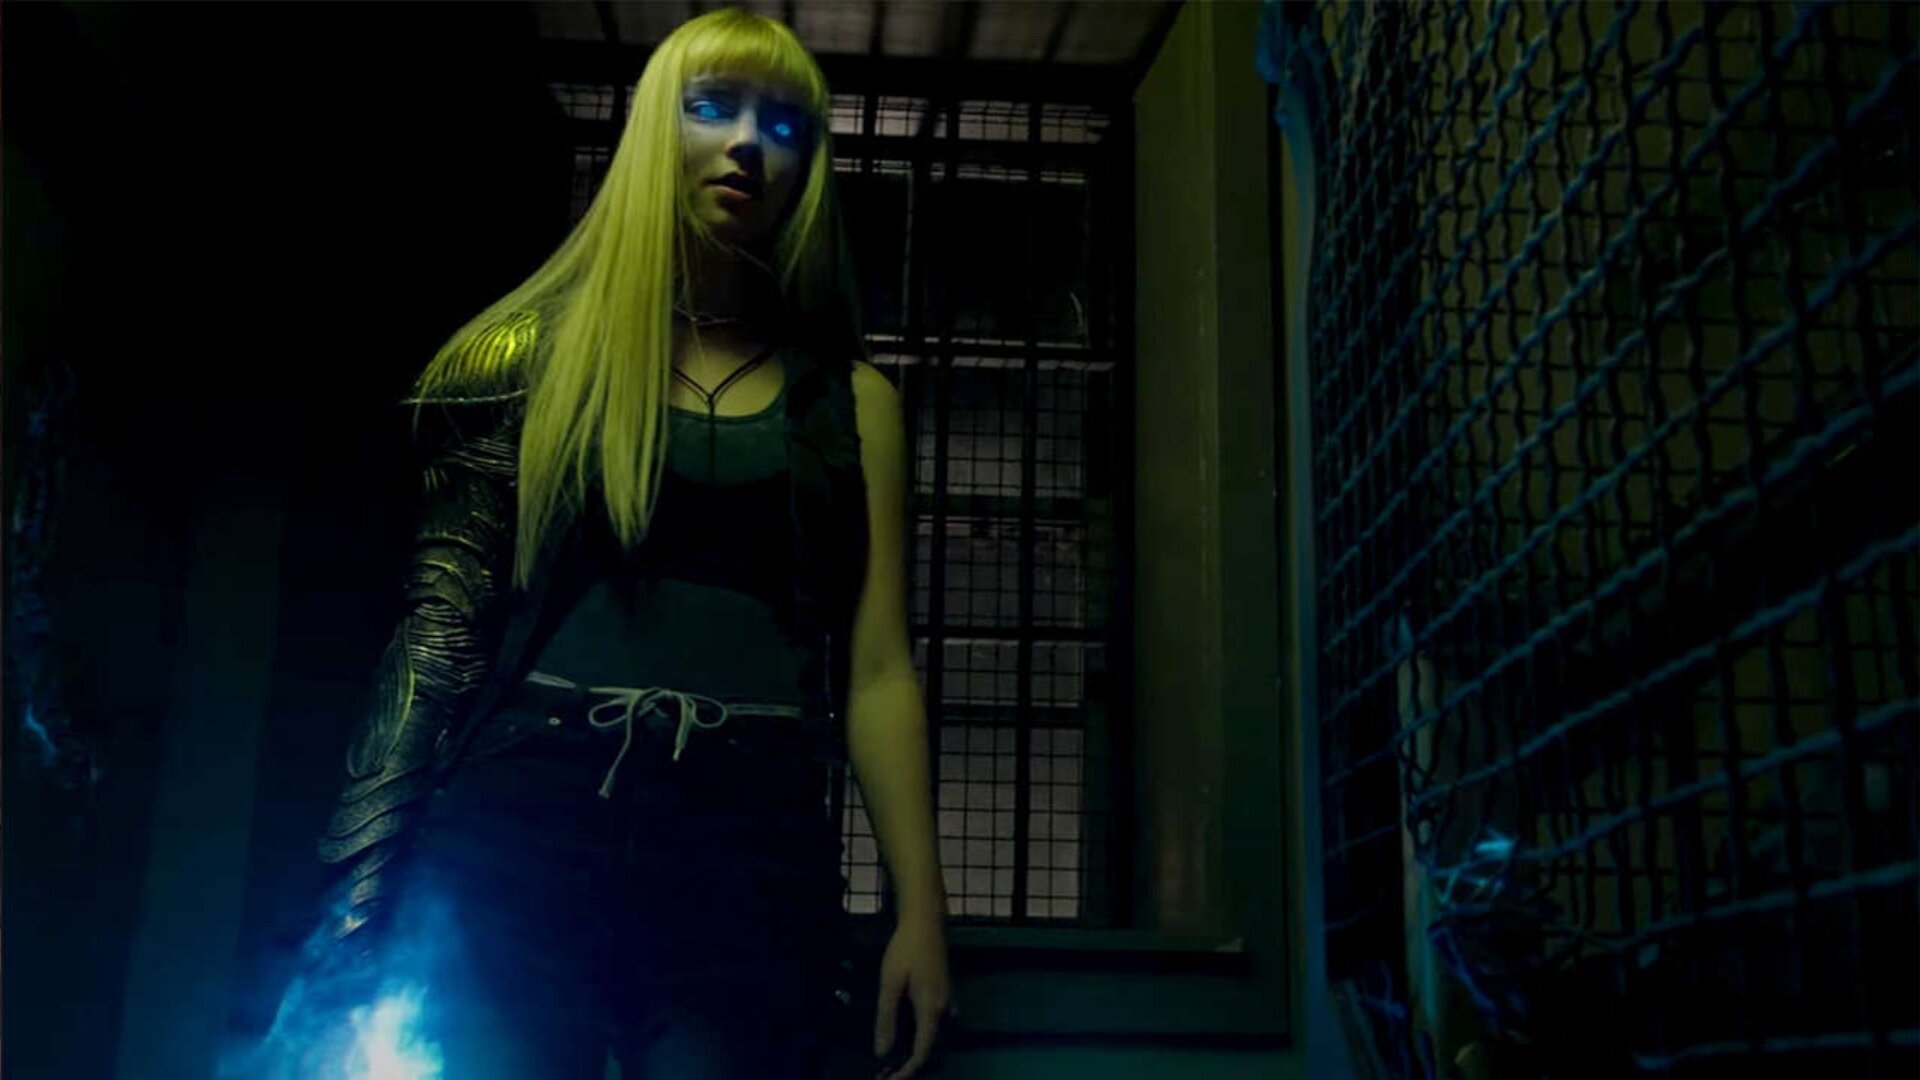 The New Mutants Finally Has A Second Trailer, Movies